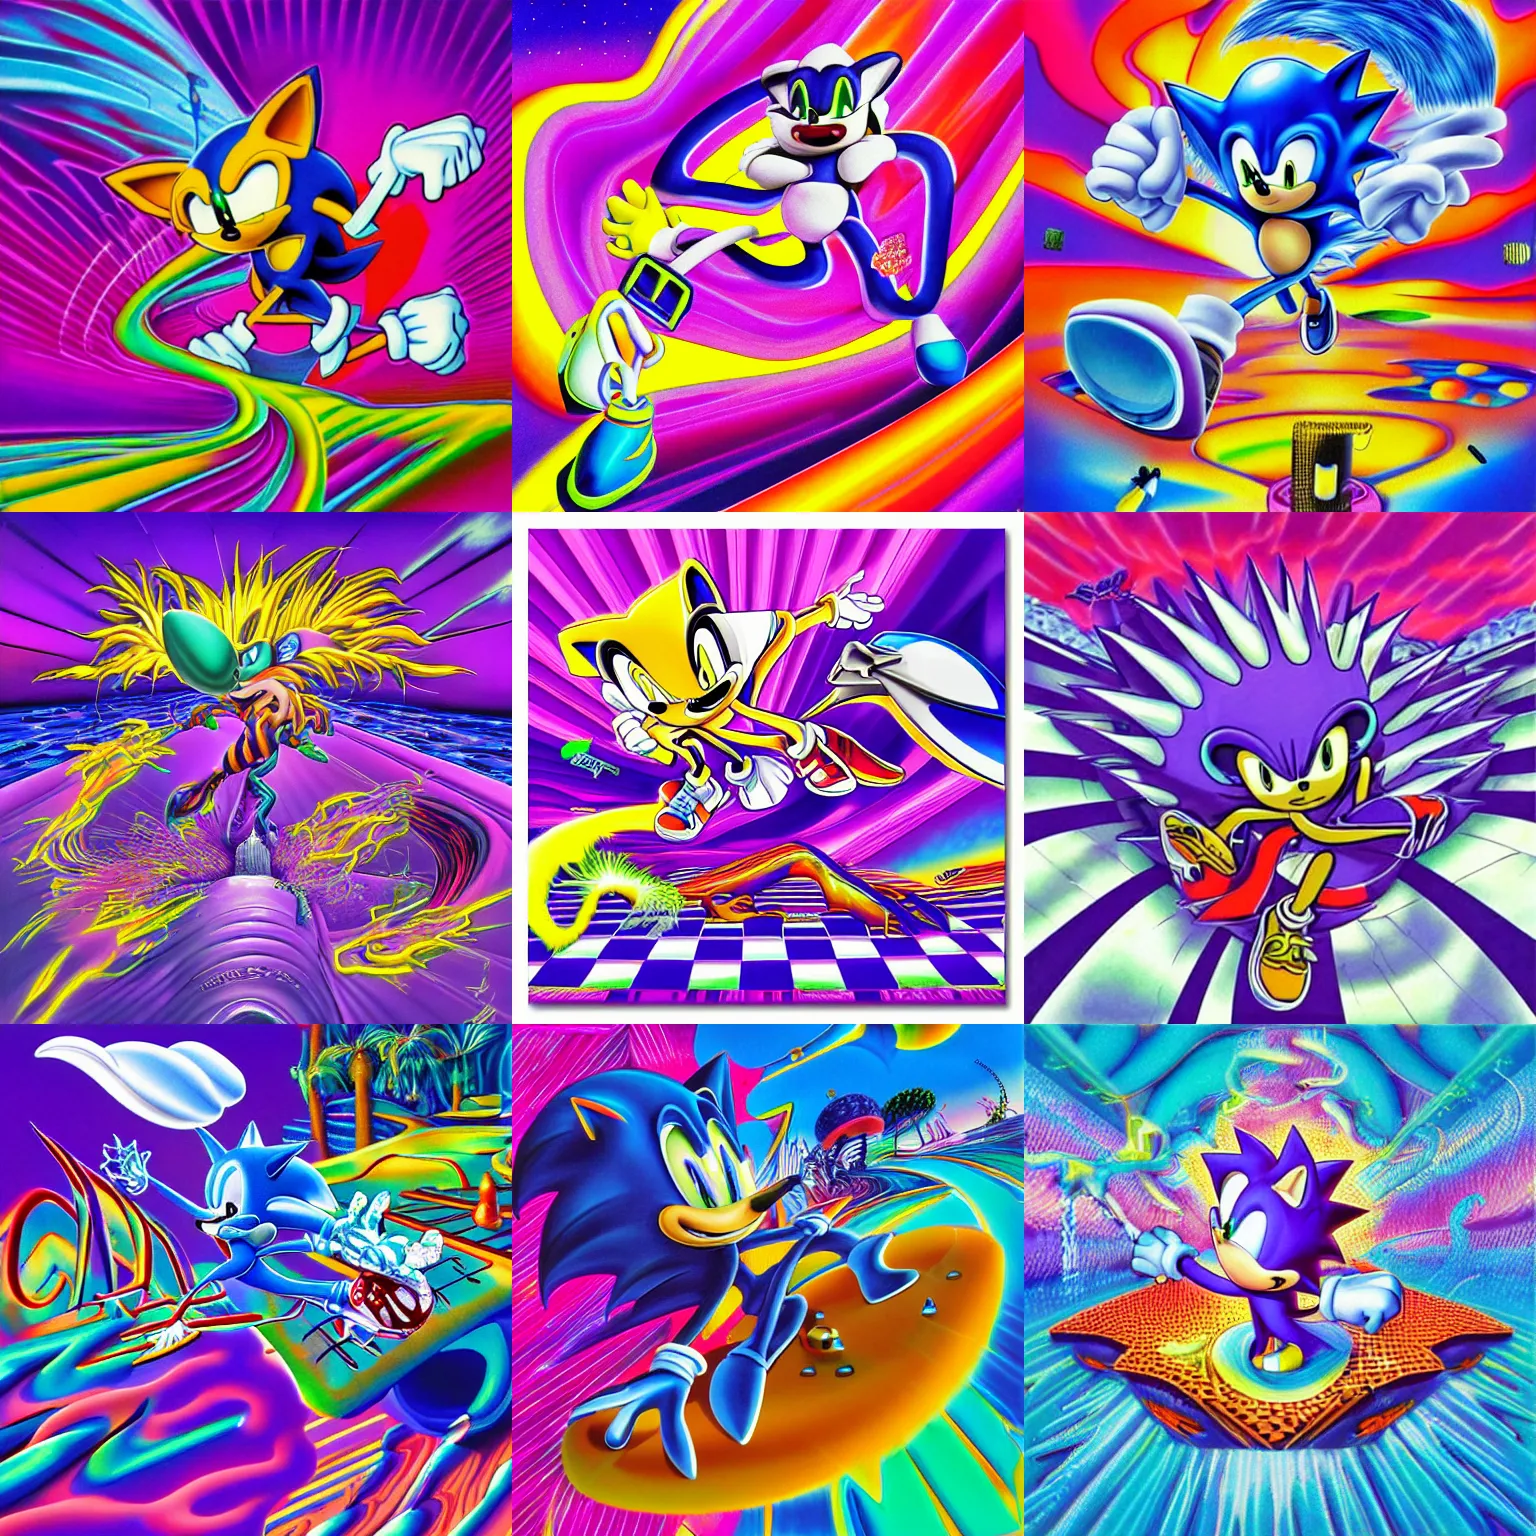 Prompt: surreal, sharp, detailed professional, high quality airbrush art mgmt album cover of a liquid dissolving airbrush art lsd dmt sonic the hedgehog surfing through cyberspace, purple checkerboard background, 1 9 9 0 s 1 9 9 2 sega genesis video game album cover